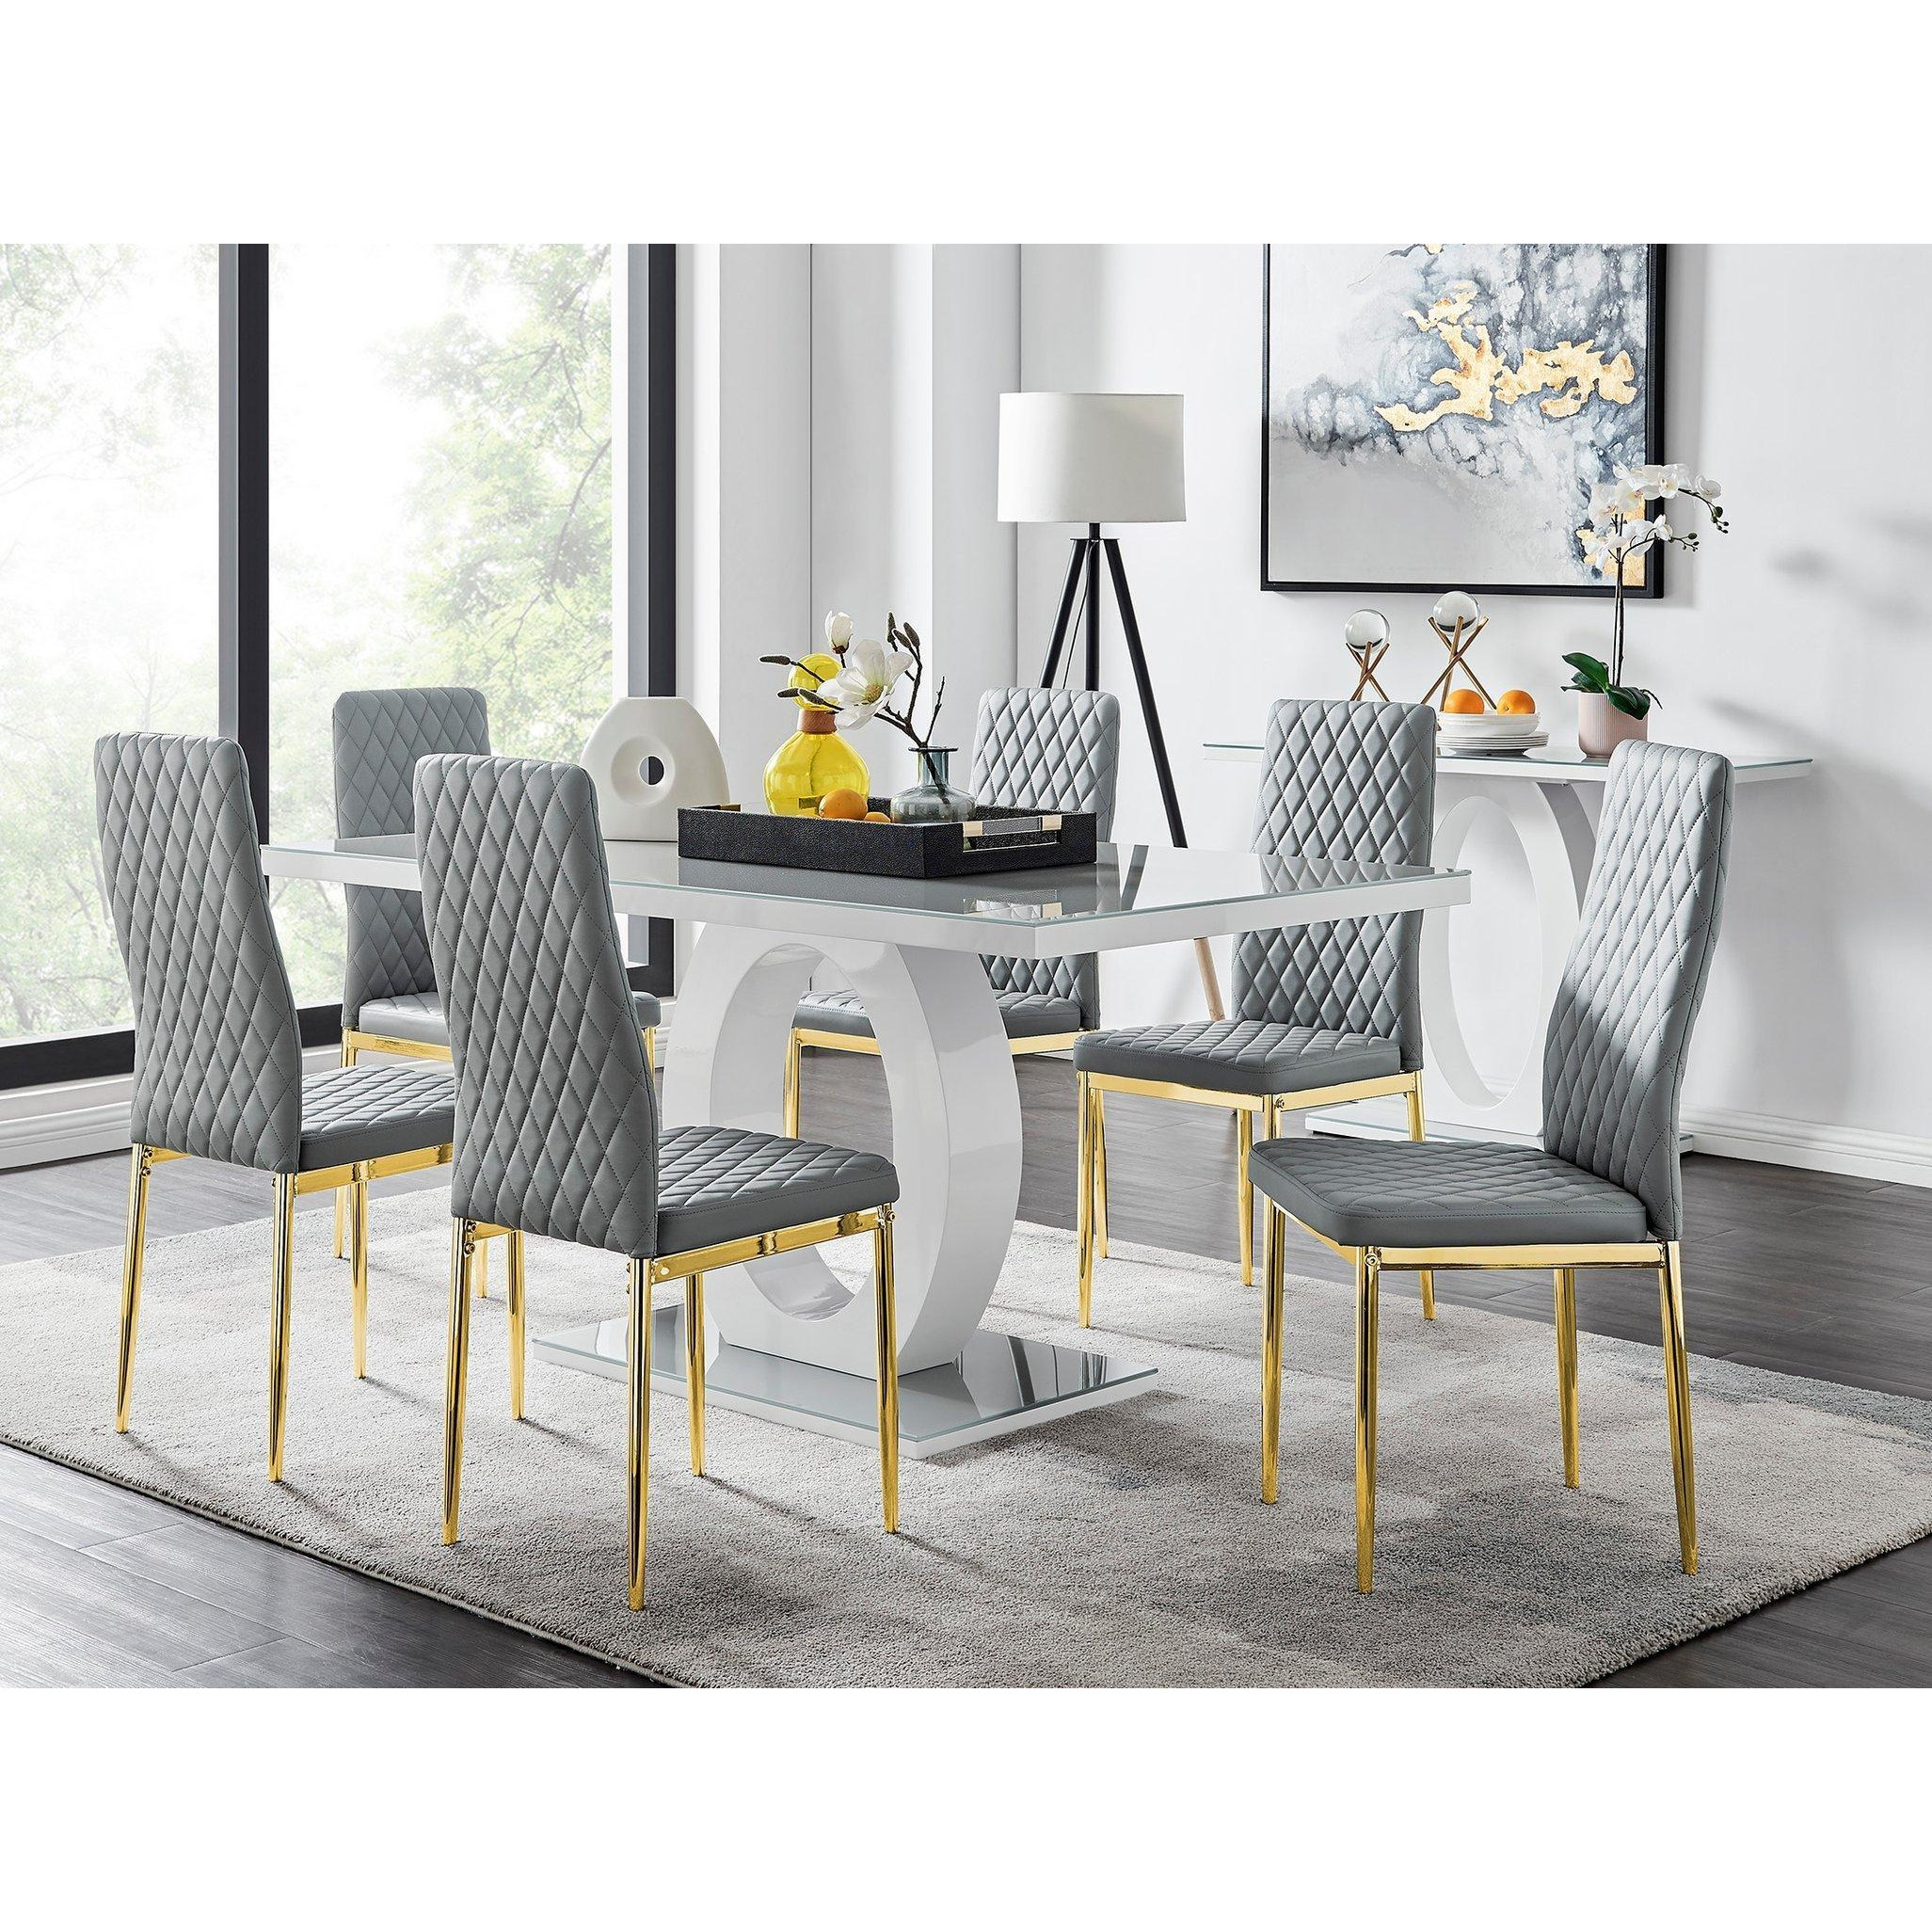 Giovani 6-Seater Grey Glass Dining Table and 6 Milan Faux Leather Dining Chairs - image 1